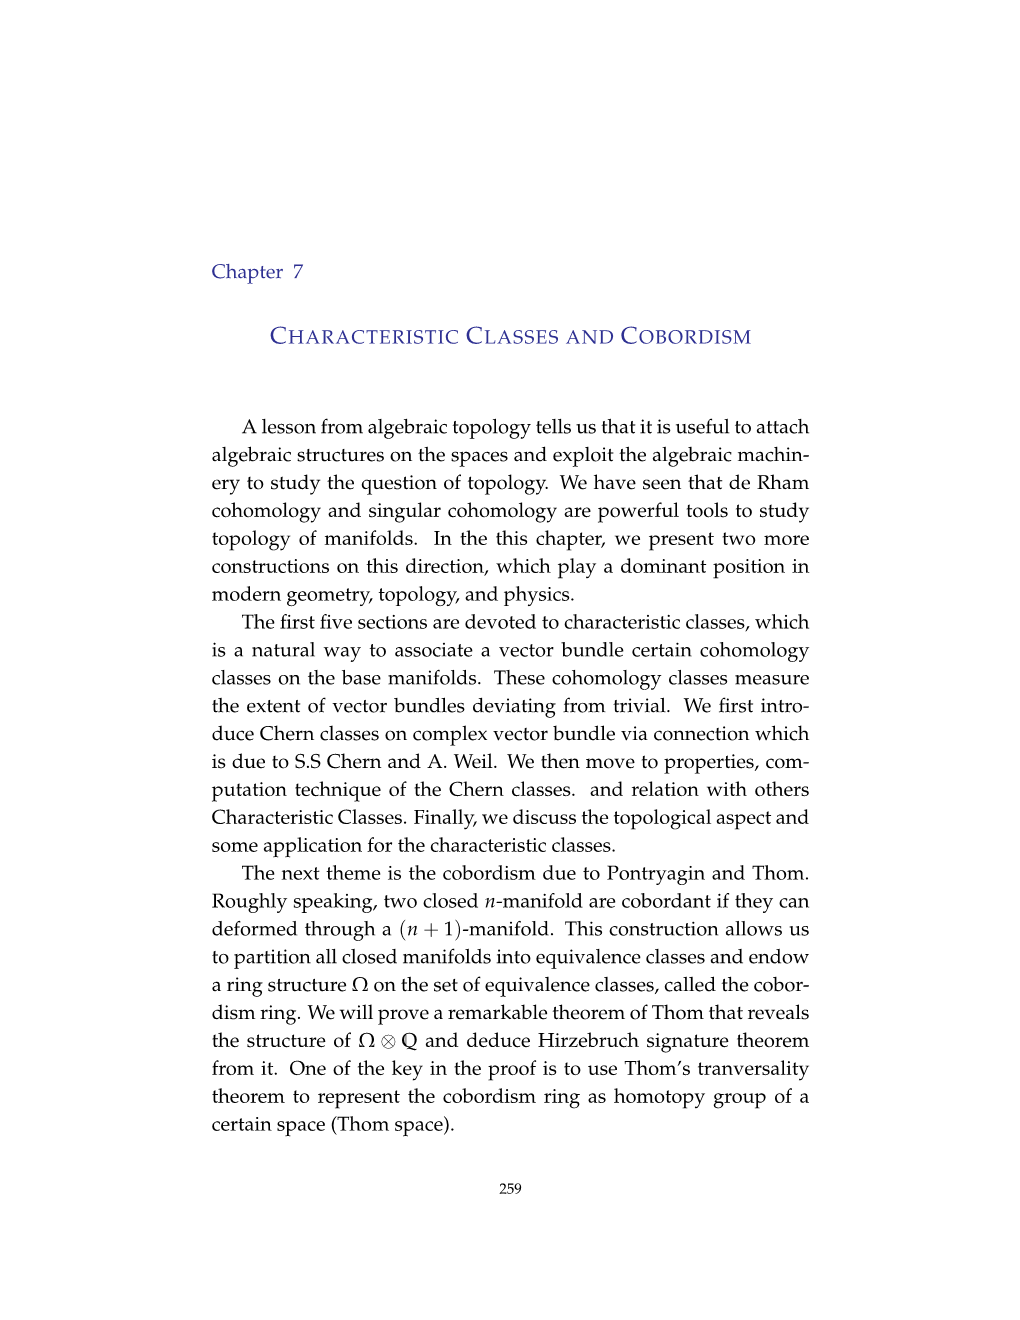 Ch.7 Characteristic Classes and Cobordism